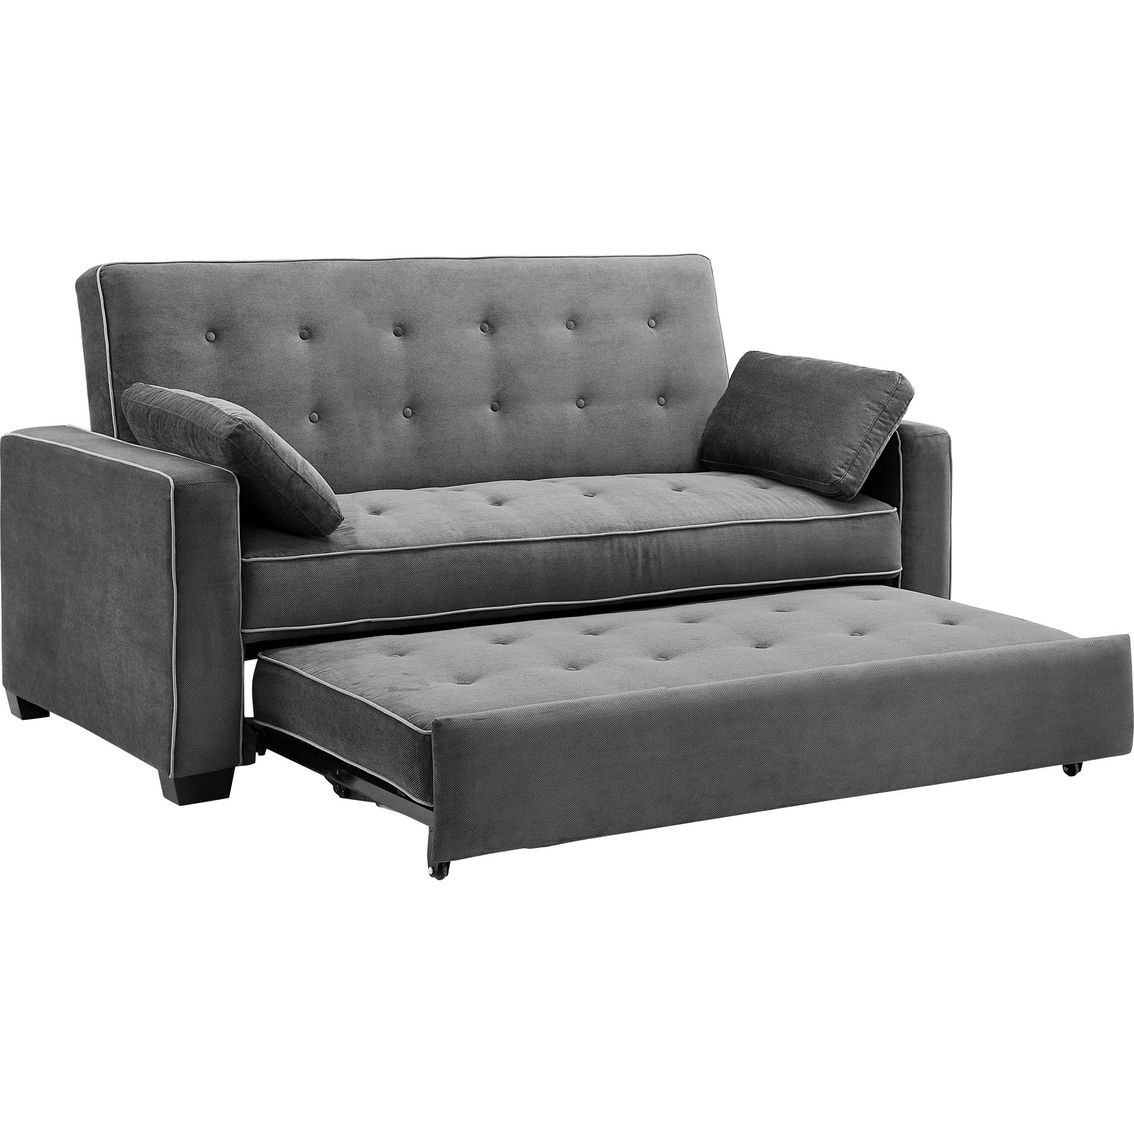 6 * 5 Feet Grey Convertible Sofa Bed, Rs 23000 /unit Viswak Enterprise Intended For Convertible Gray Loveseat Sleepers (Gallery 18 of 20)